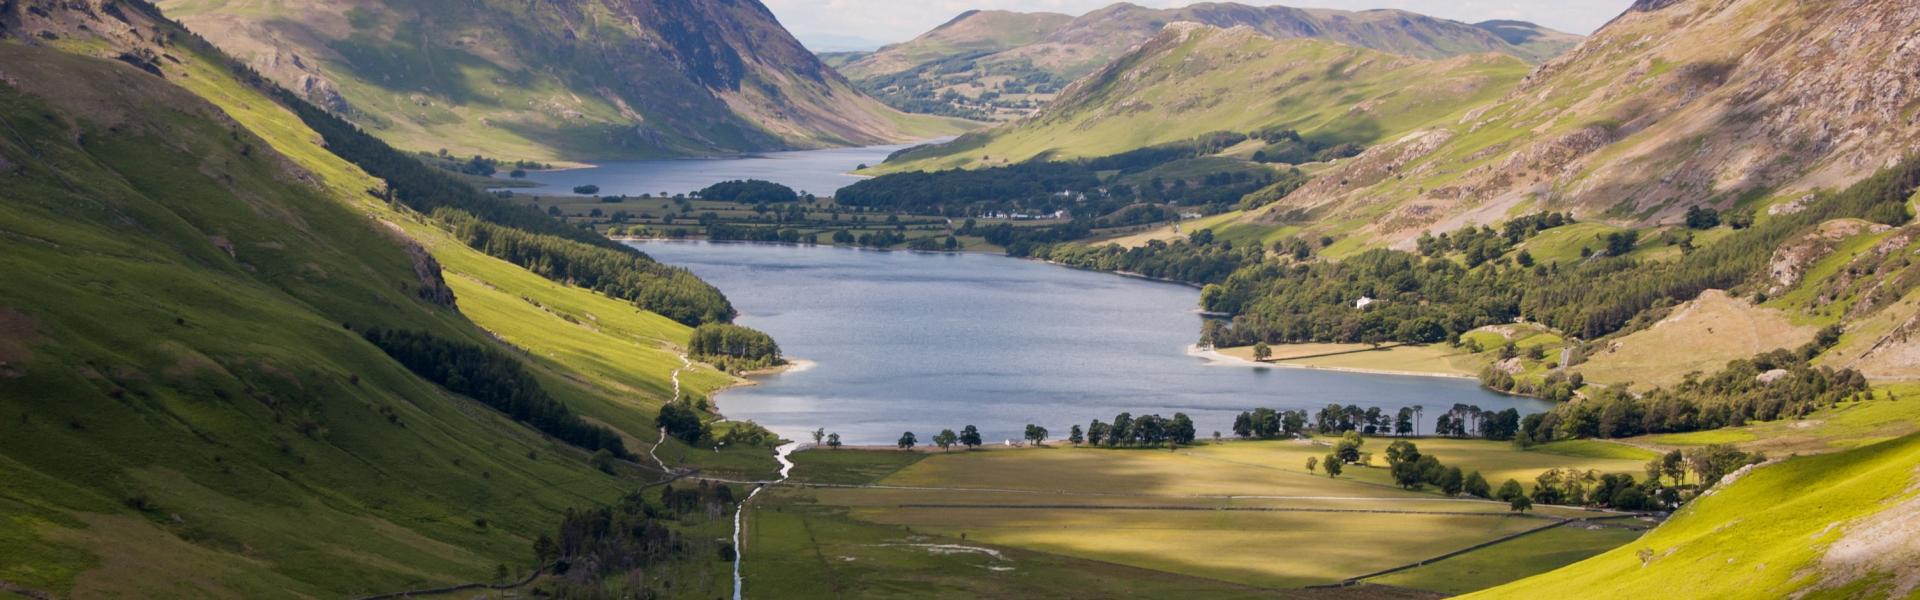 Holiday lettings & accommodation in Borrowdale - HomeToGo